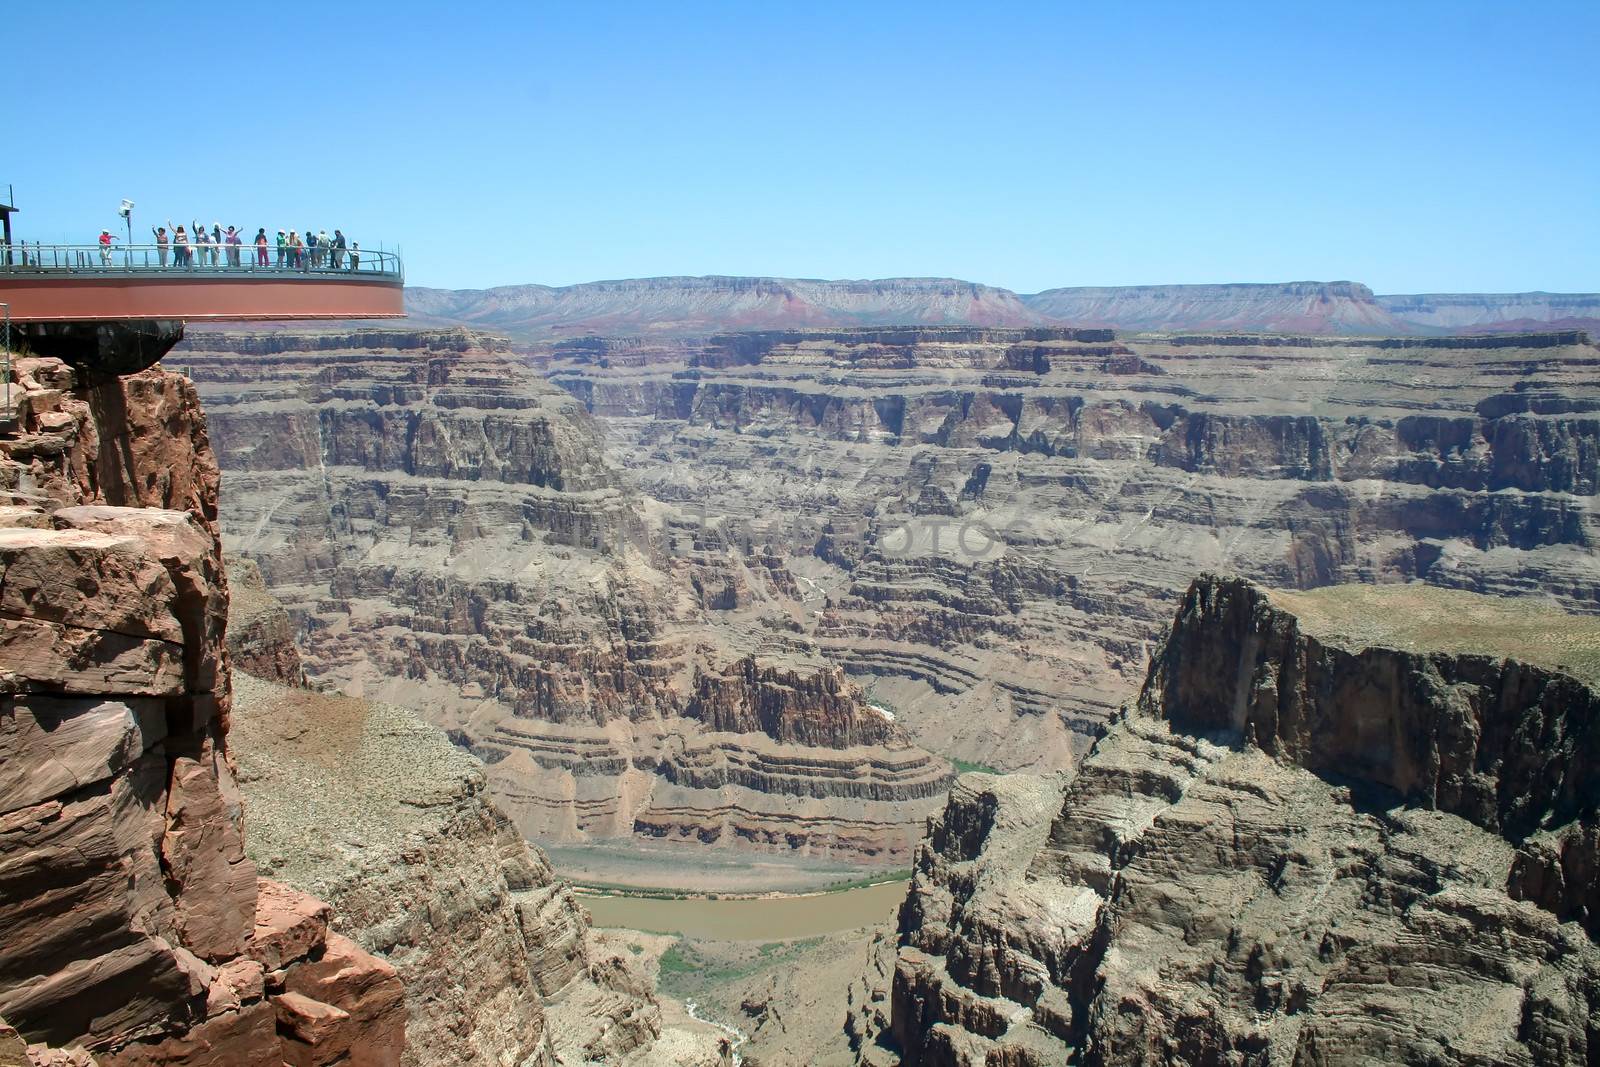 The glass skywalk observation bridge suspended four thousand feet above the Colorado River on the edge of the Grand Canyon West.